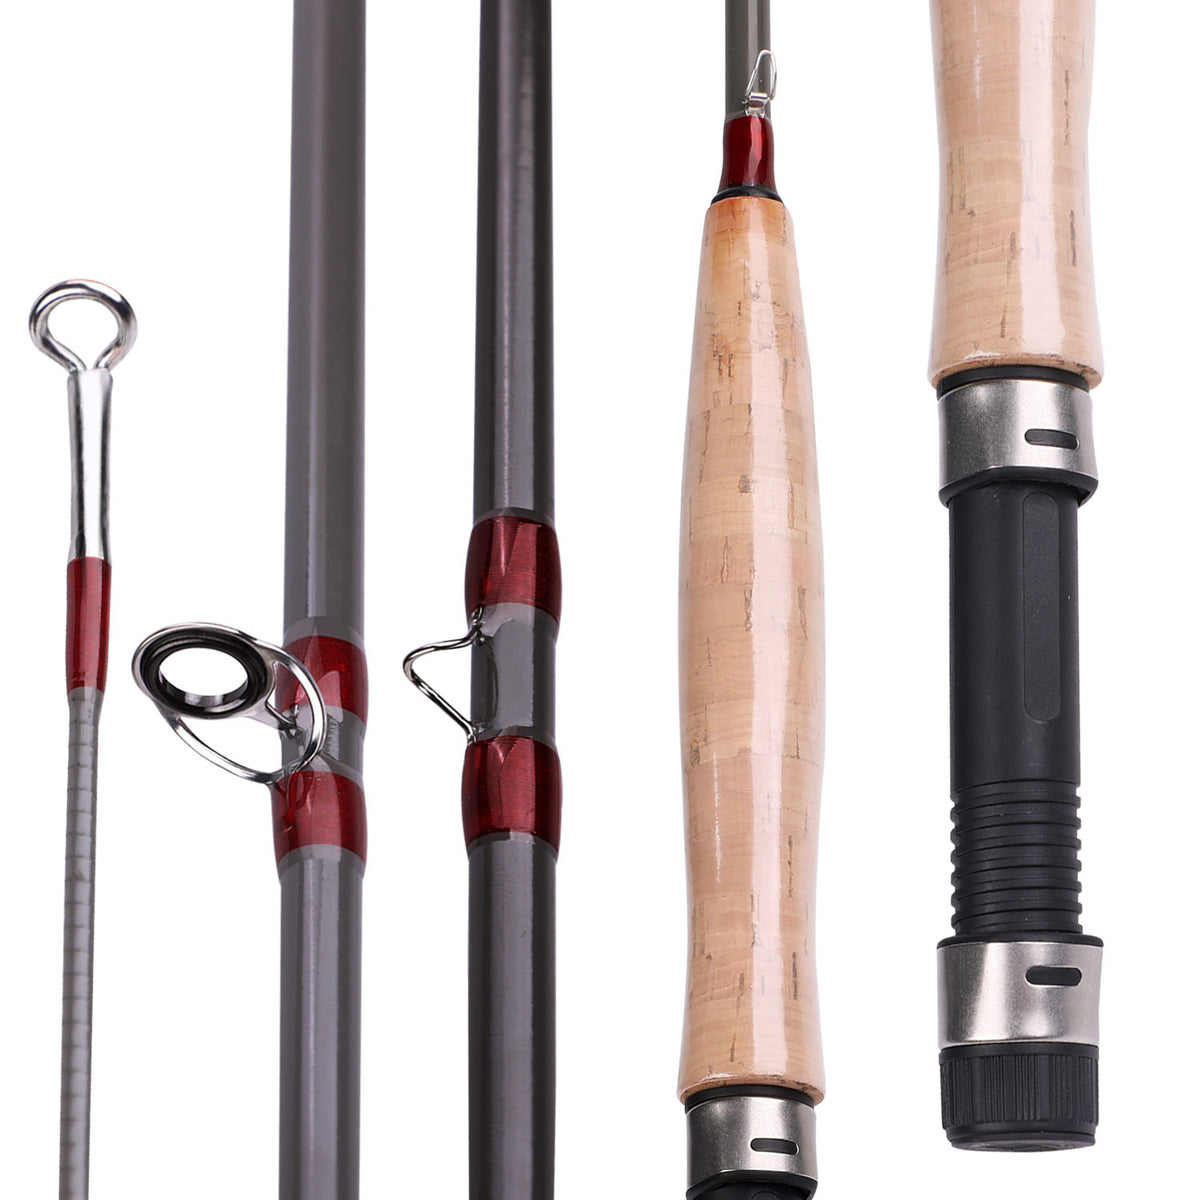 2.7M Portable 4 Section Fly Fishing Pole